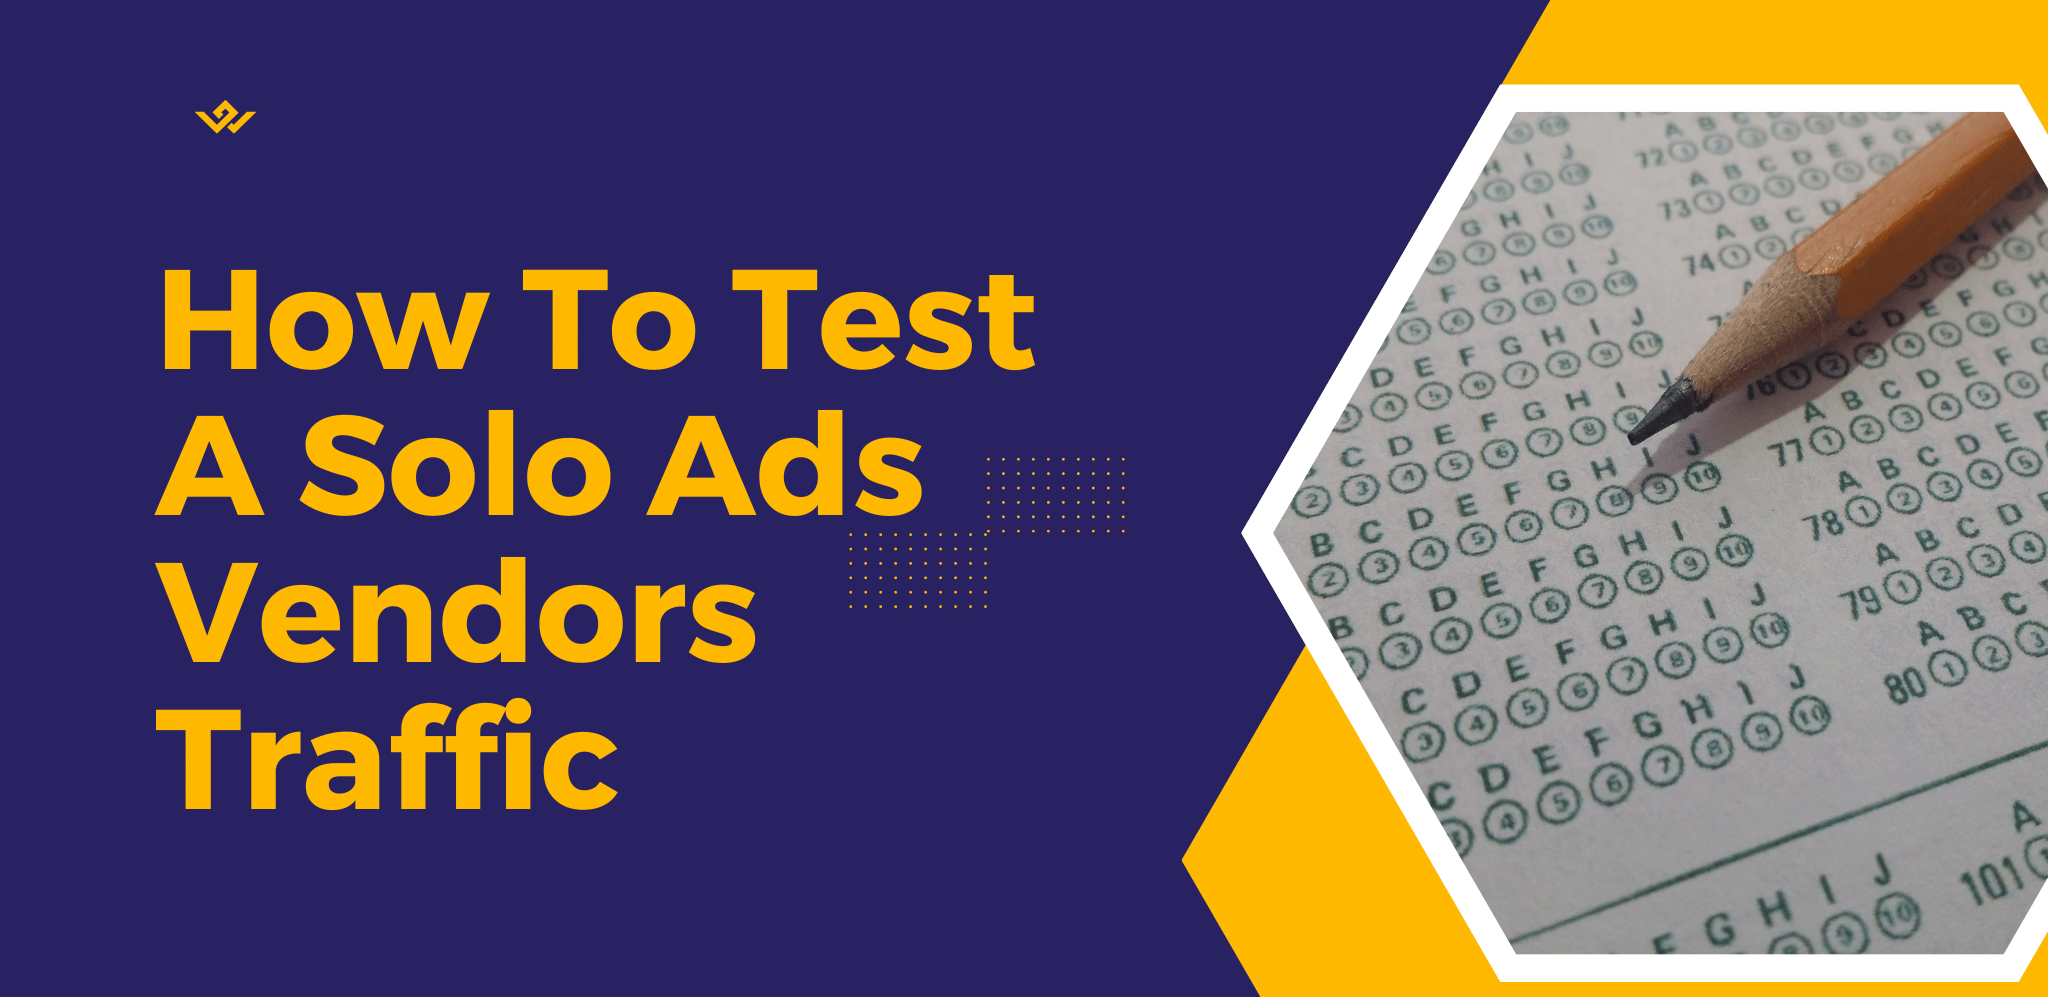 How To Test A Solo Ads Vendors Traffic